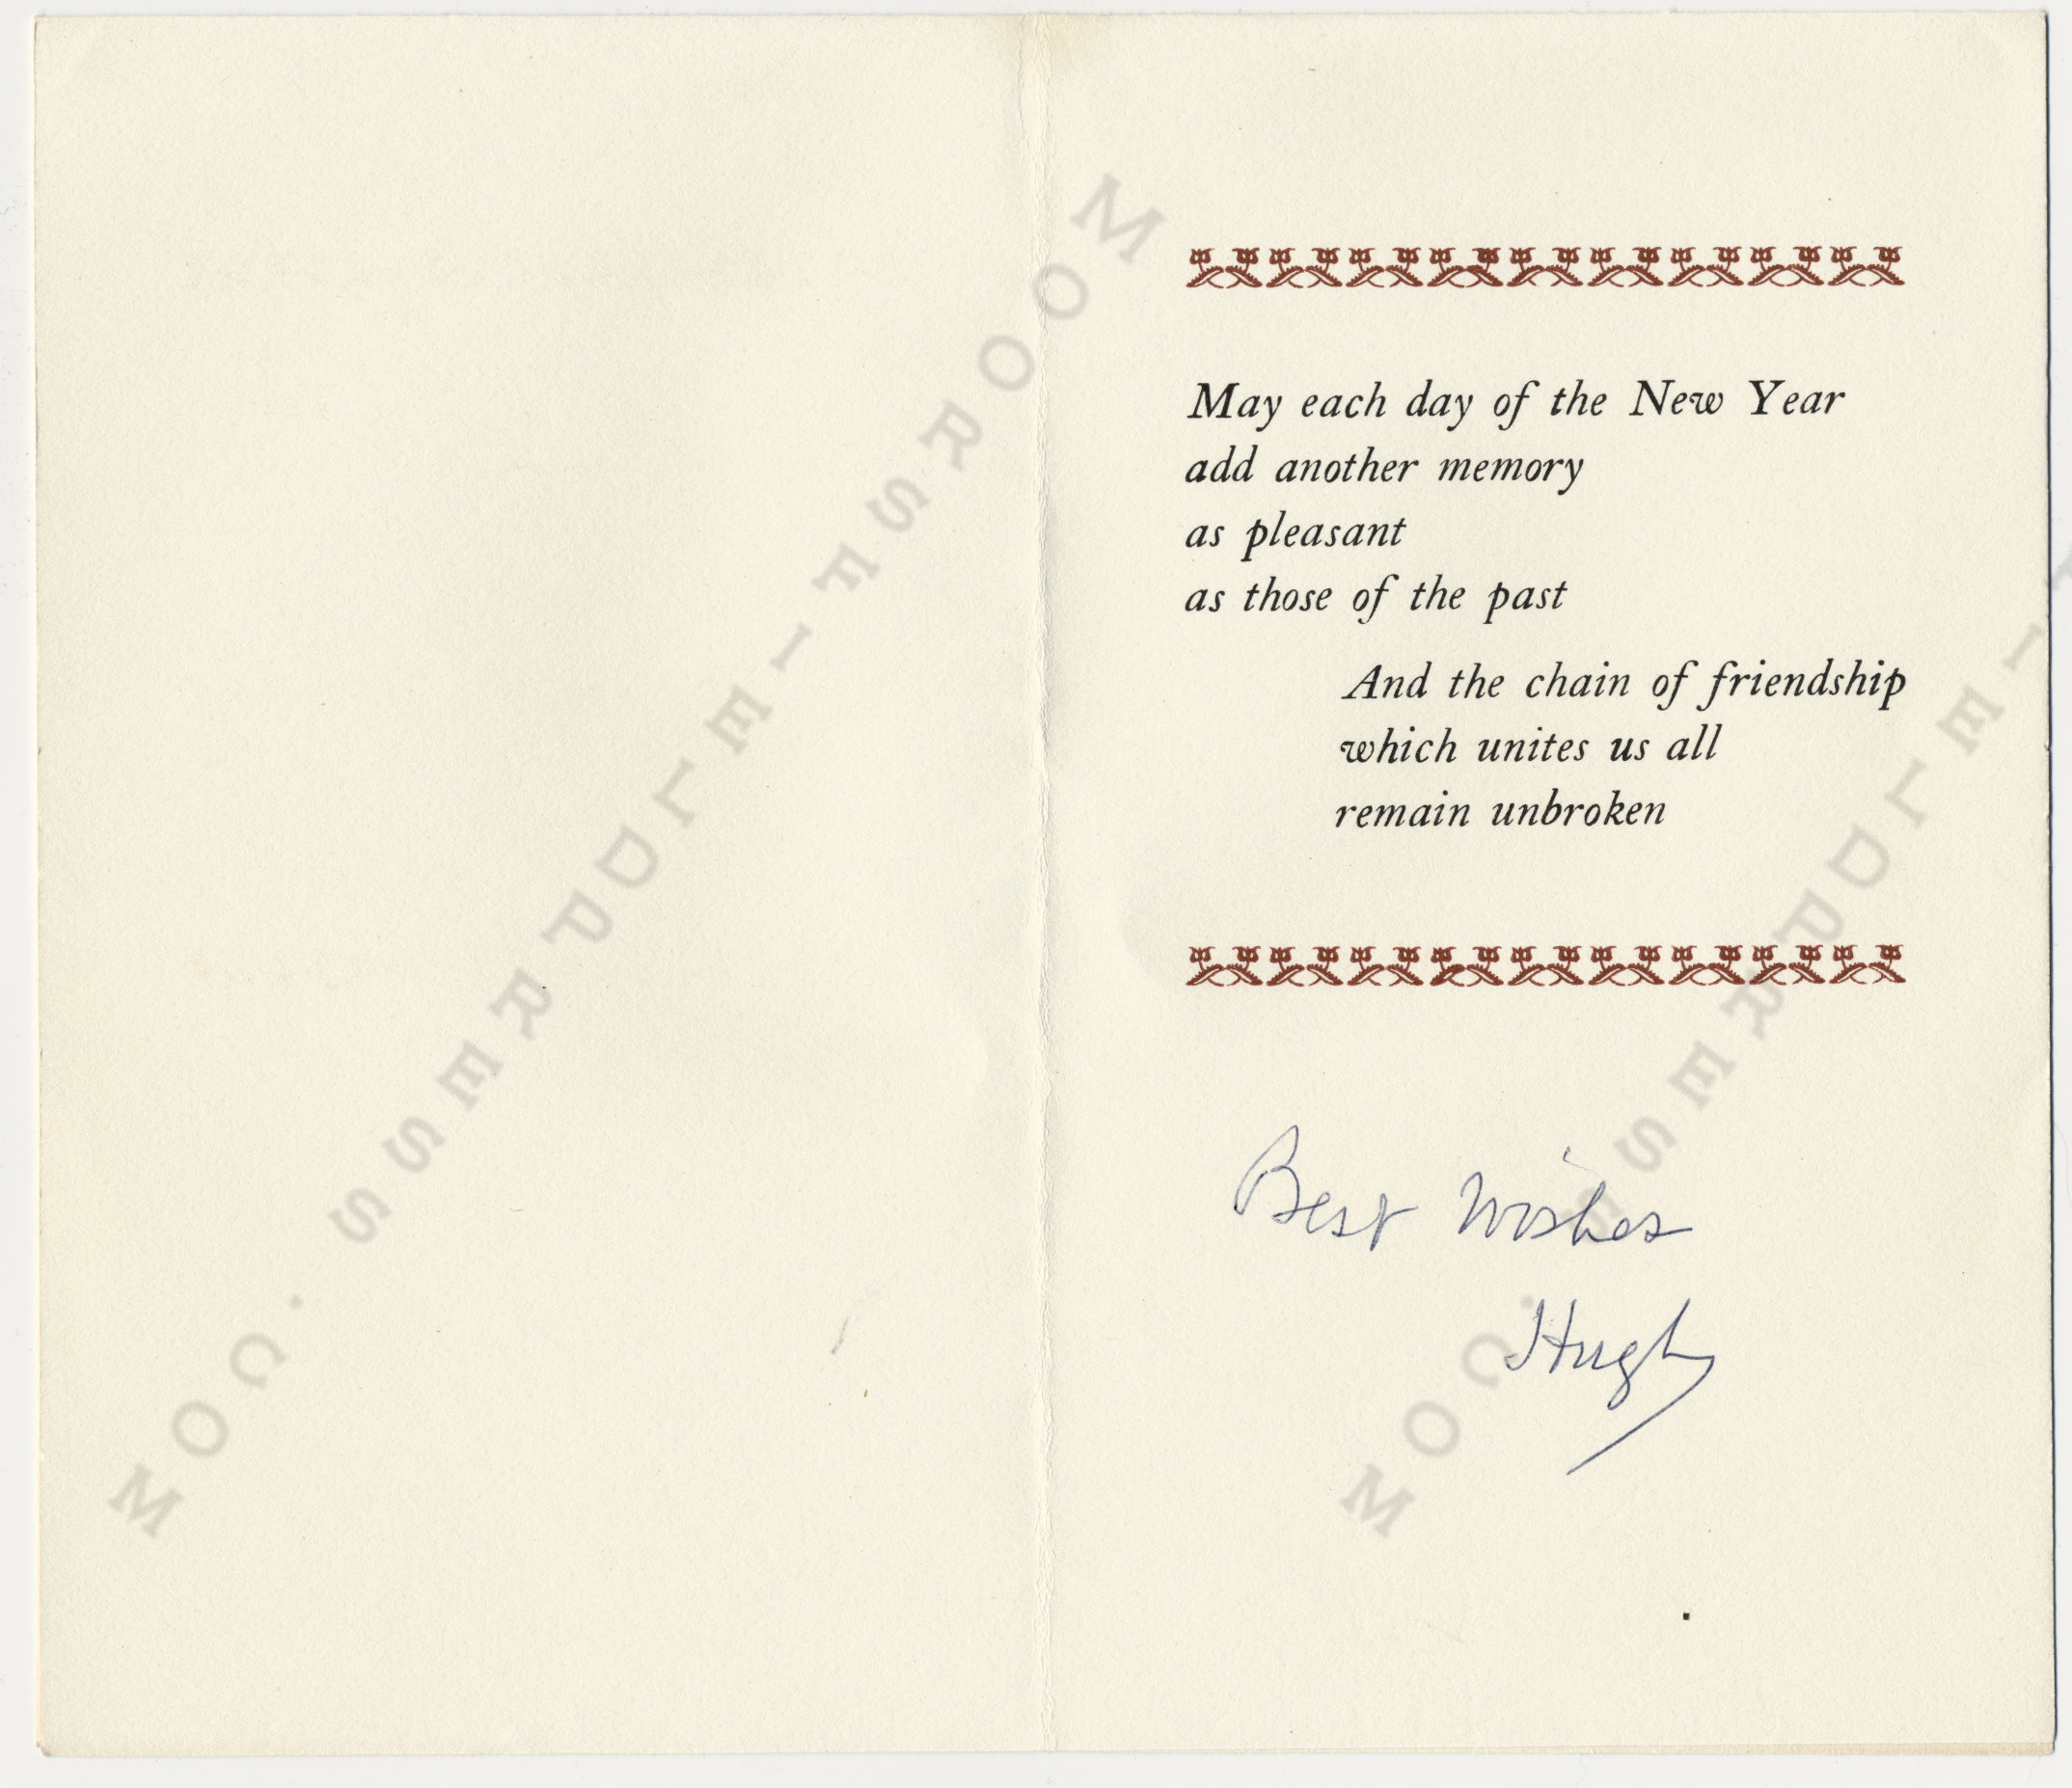 The
                      McLellan Christmas Cards printed by the Moorsfield
                      Press